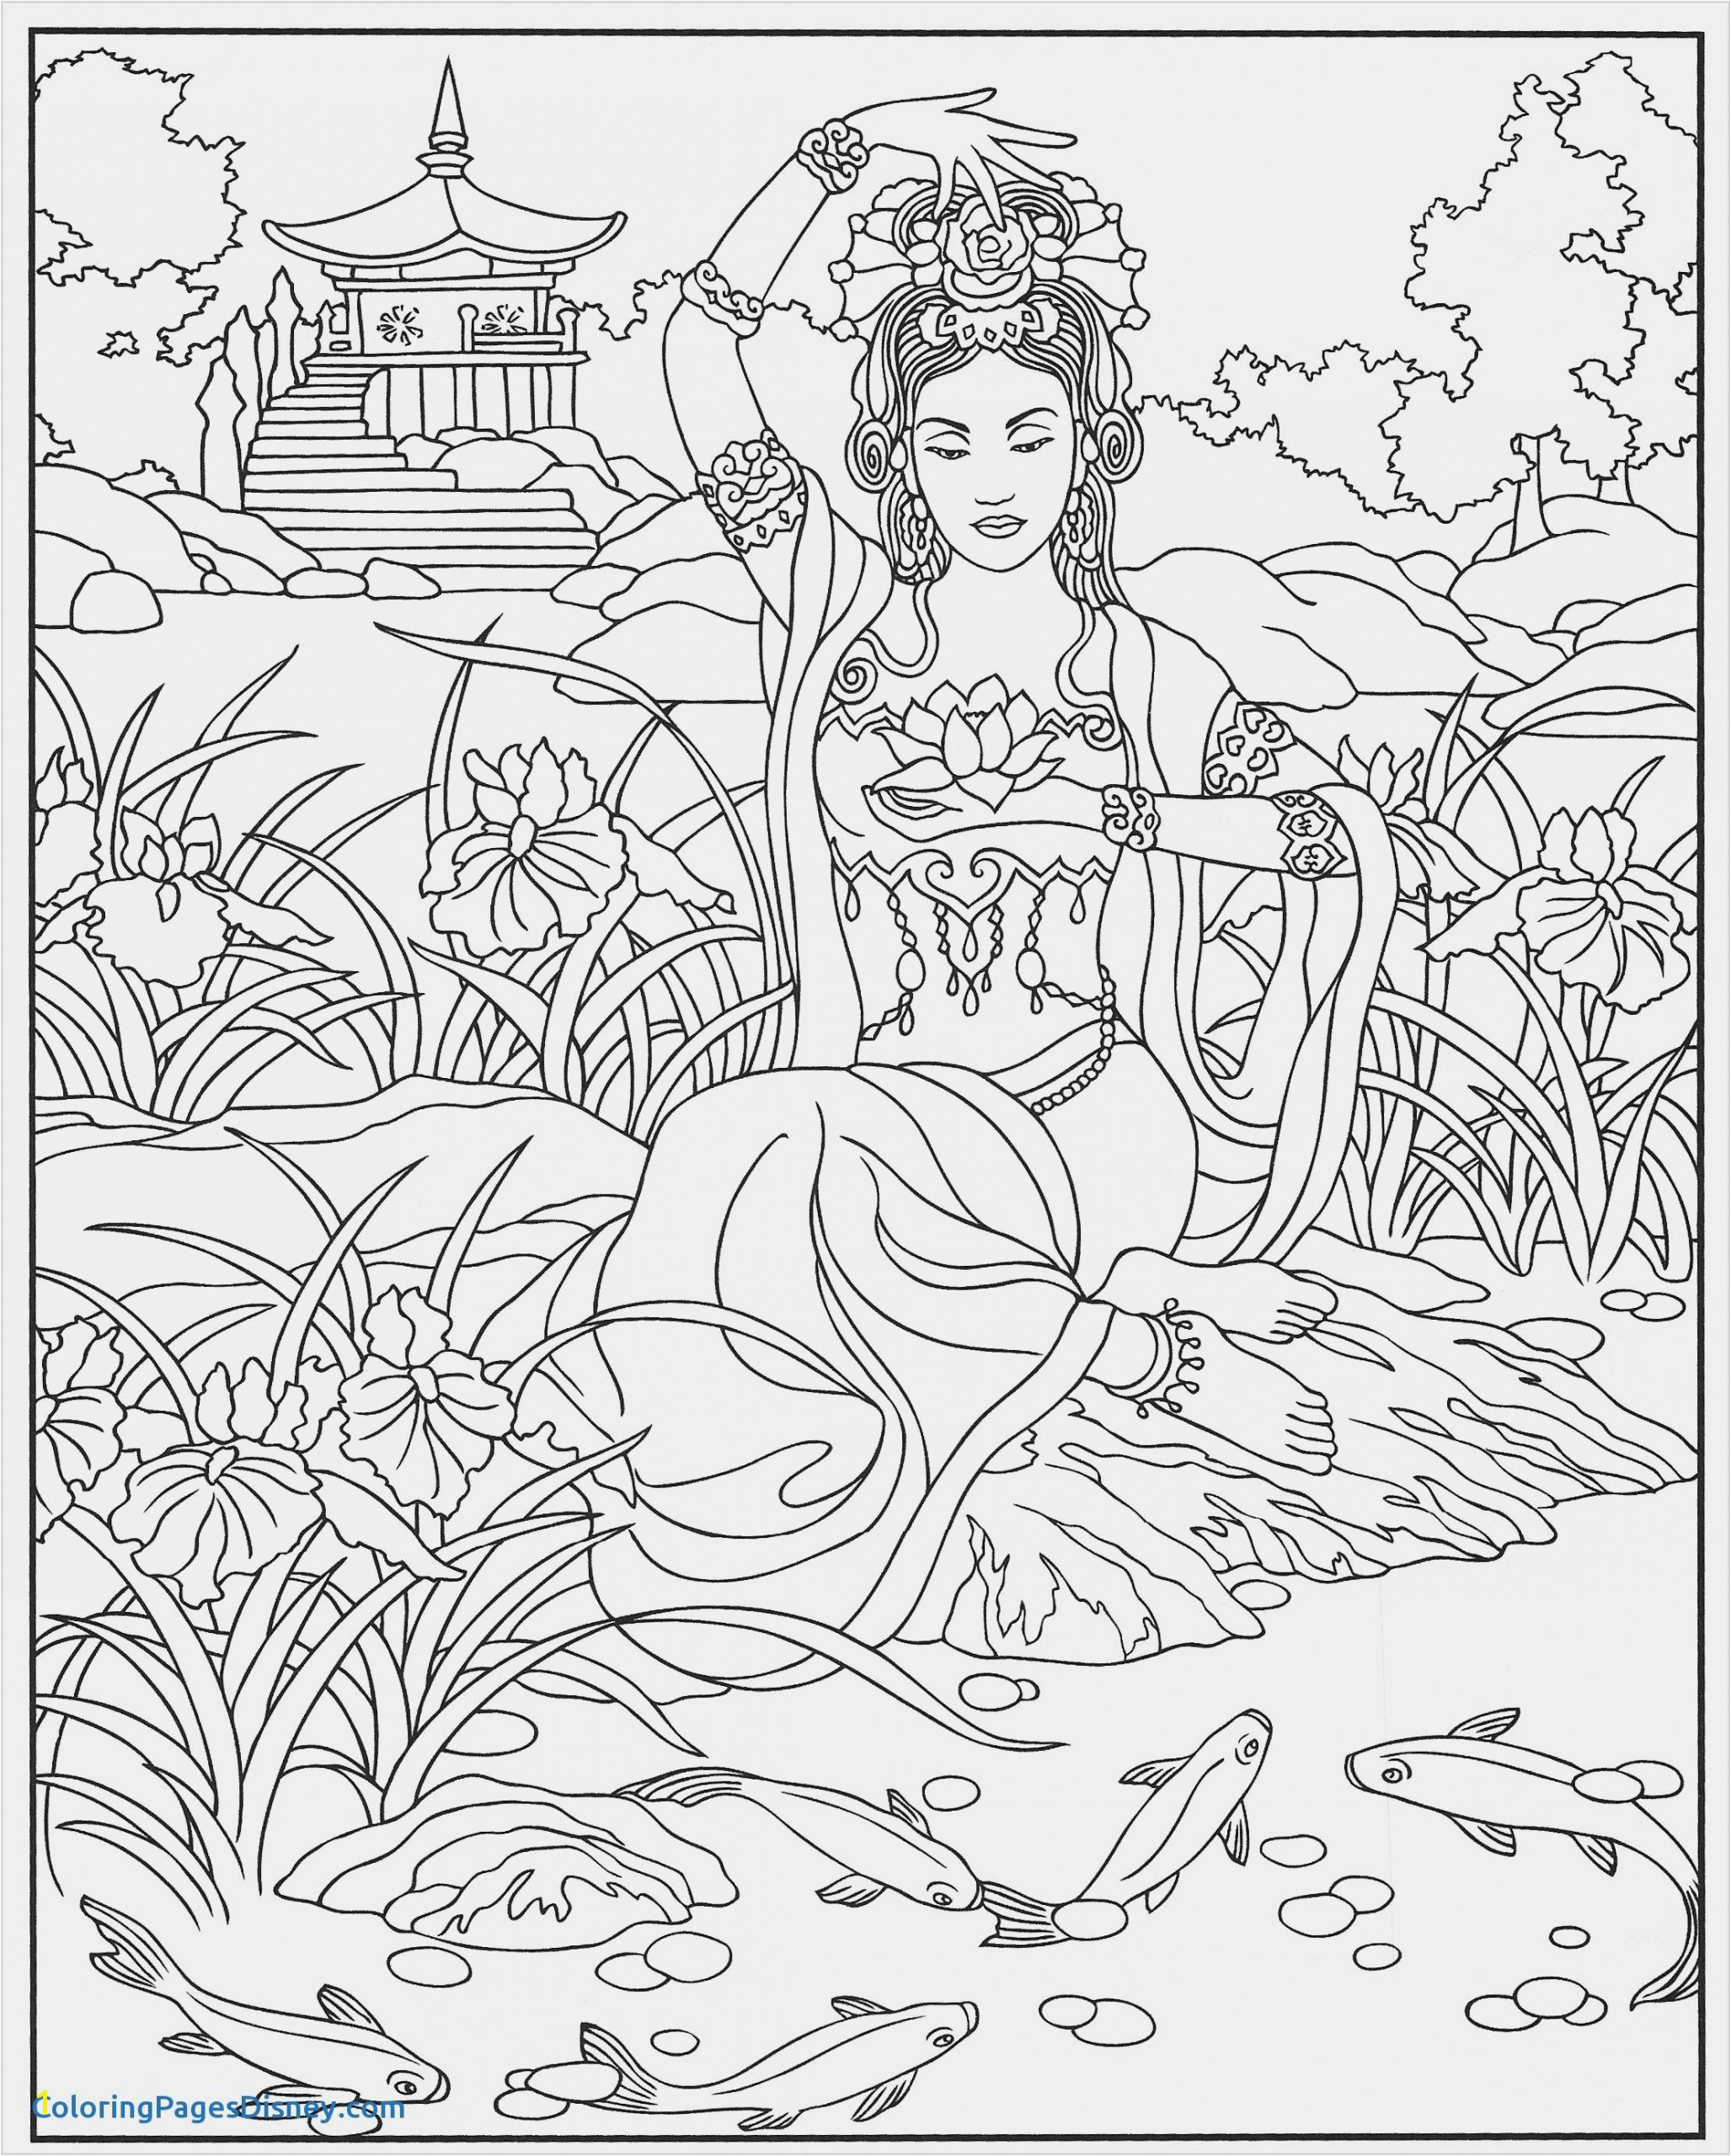 Rose Coloring Pages for Girls Cheetah Coloring Pages Free Printable at Coloring Pages